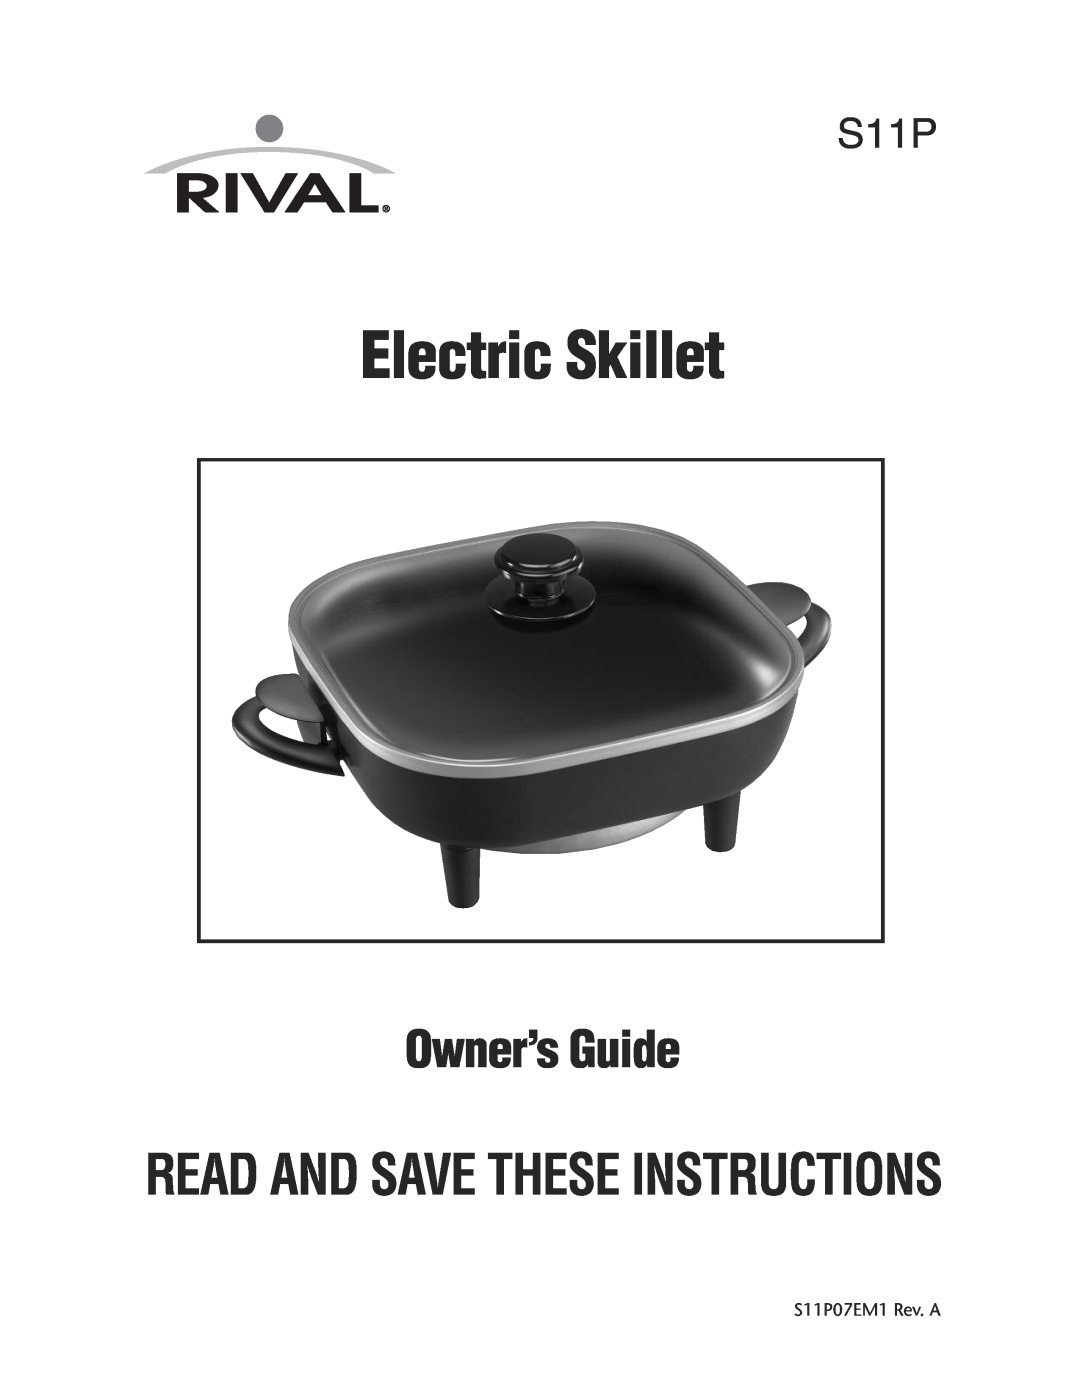 Rival S11P manual Electric Skillet, Owner’sGuide, Read And Save Theseinstructions 